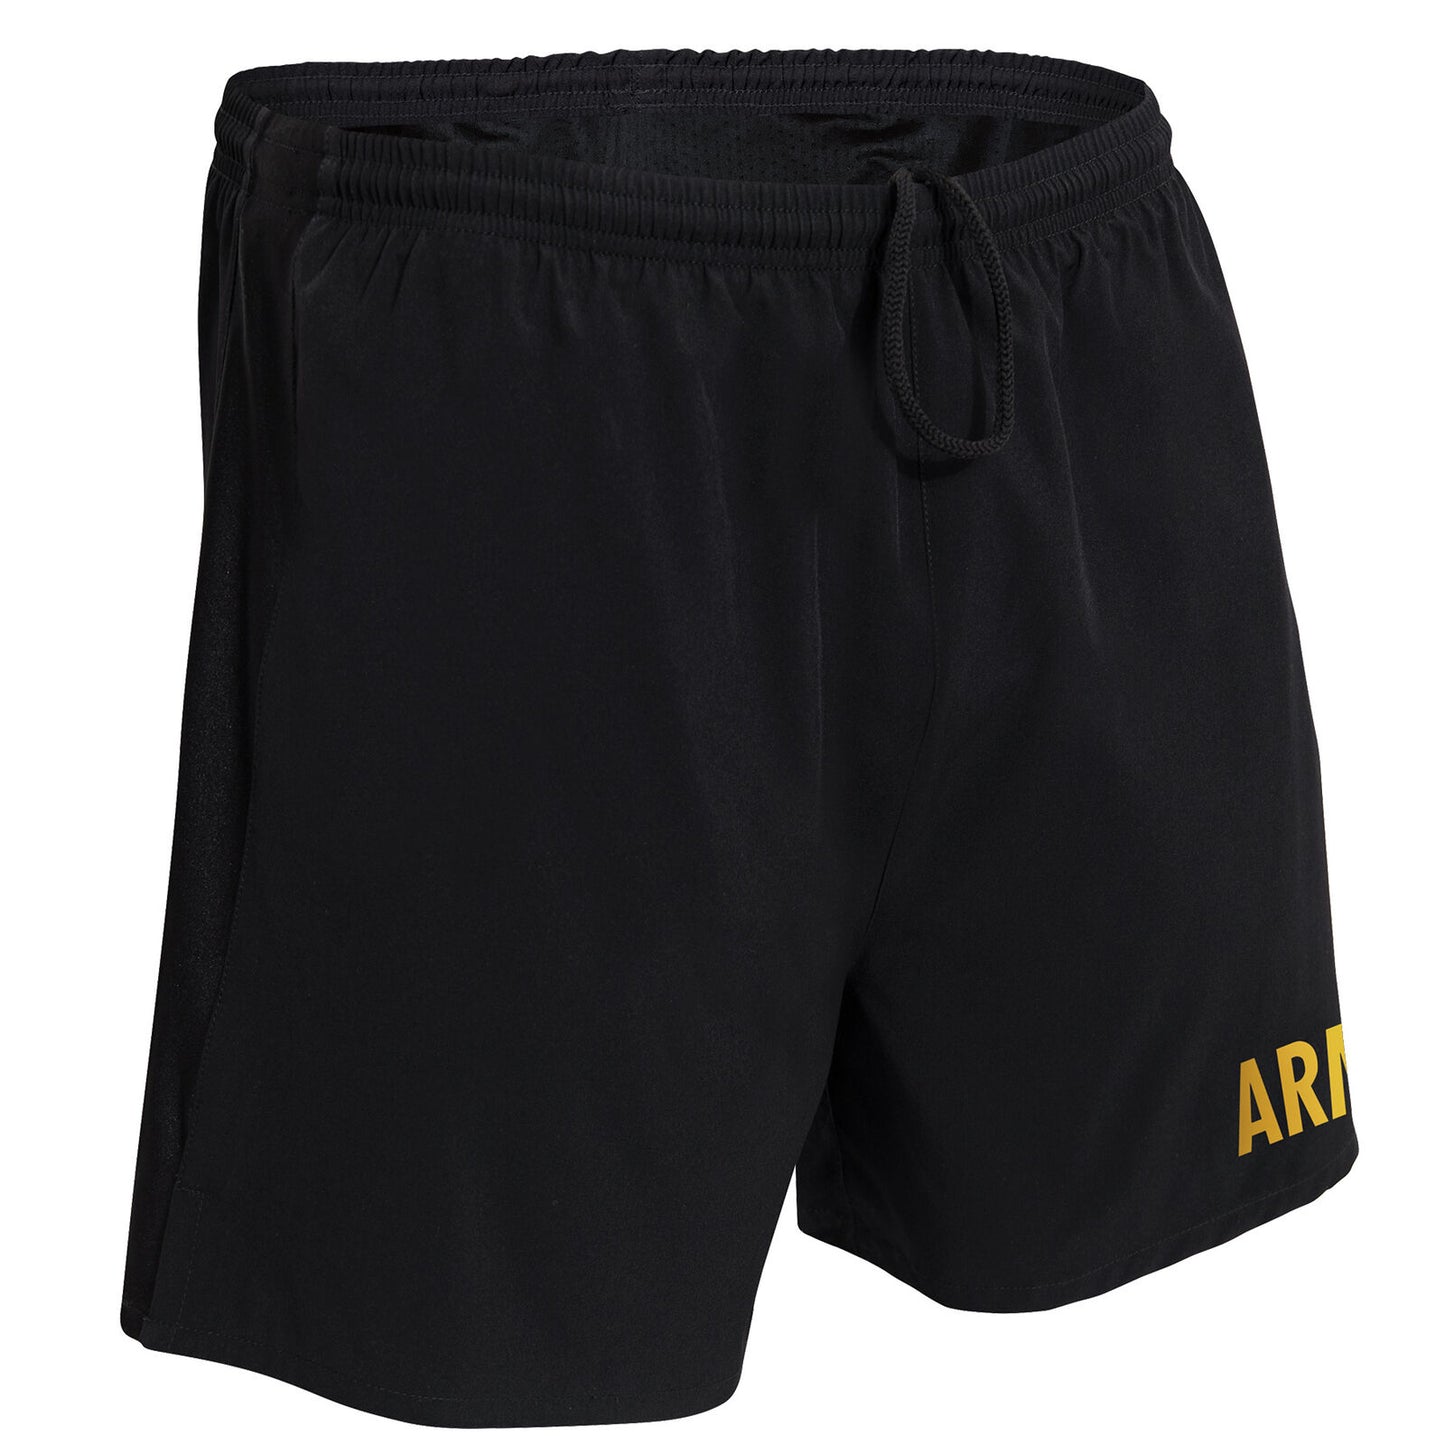 Men's Black Compression Shorts with ARMY Logo Running Athletic Shorts